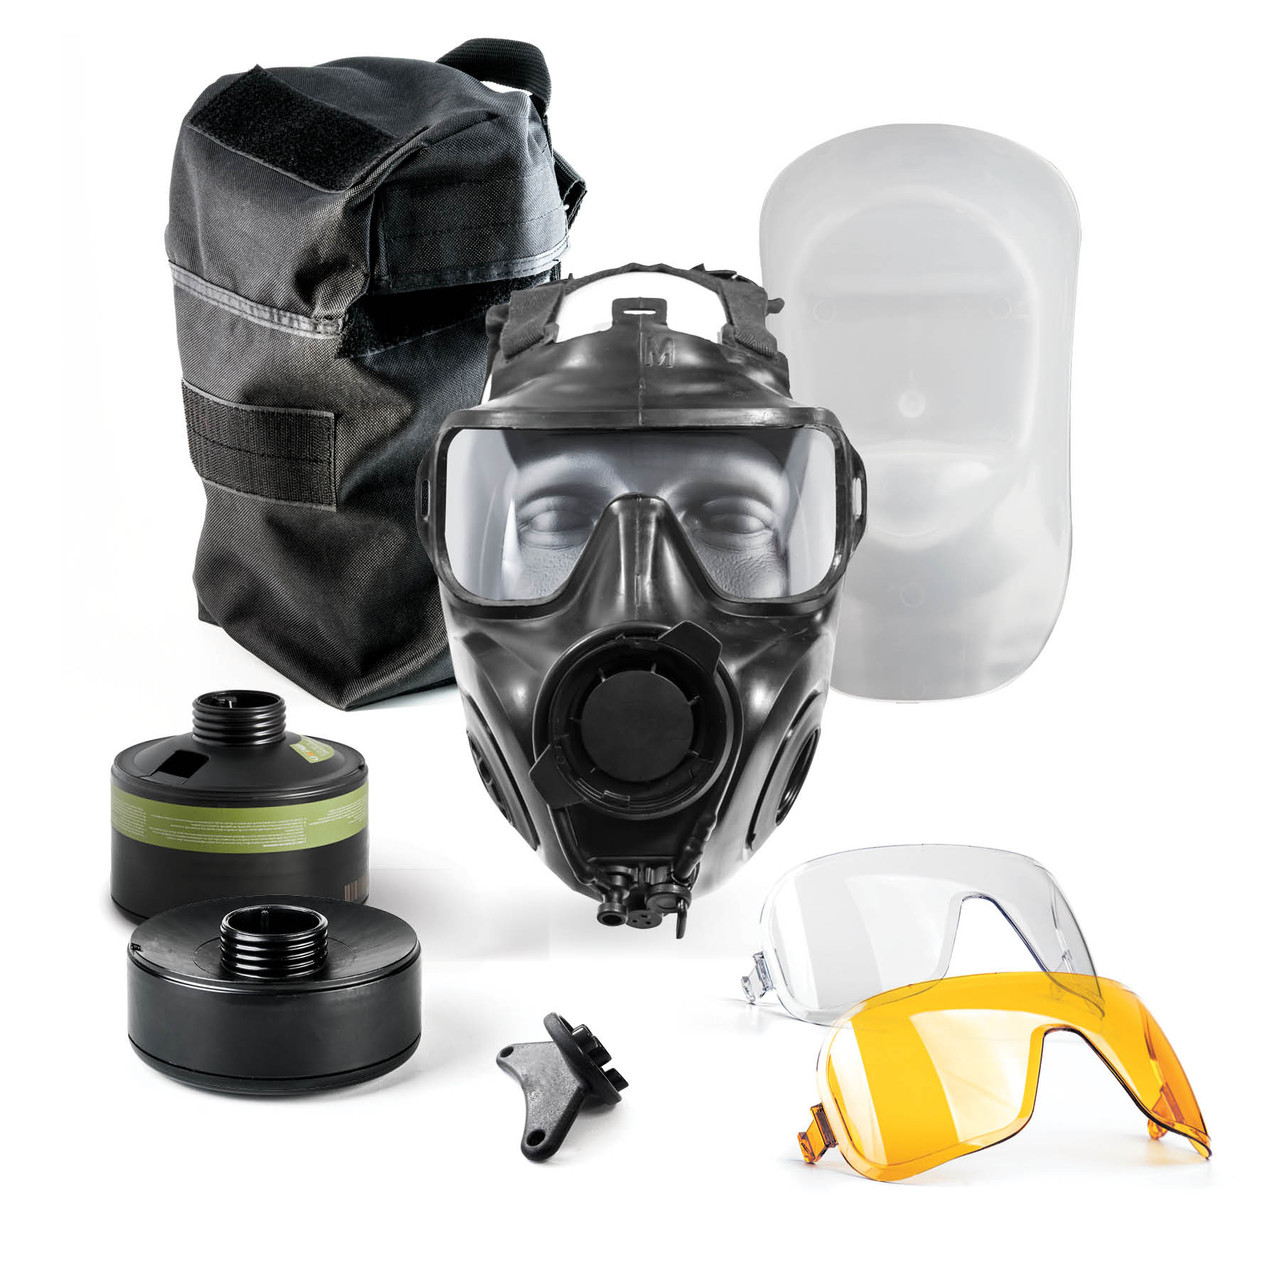 Avon Protection FM54 Twinport Specialist Responder Kit, Single Mask (APR) Air Purifying Respirator, Scratch Resistant, Communication Port for Integrated Voice Projection (not incl.)